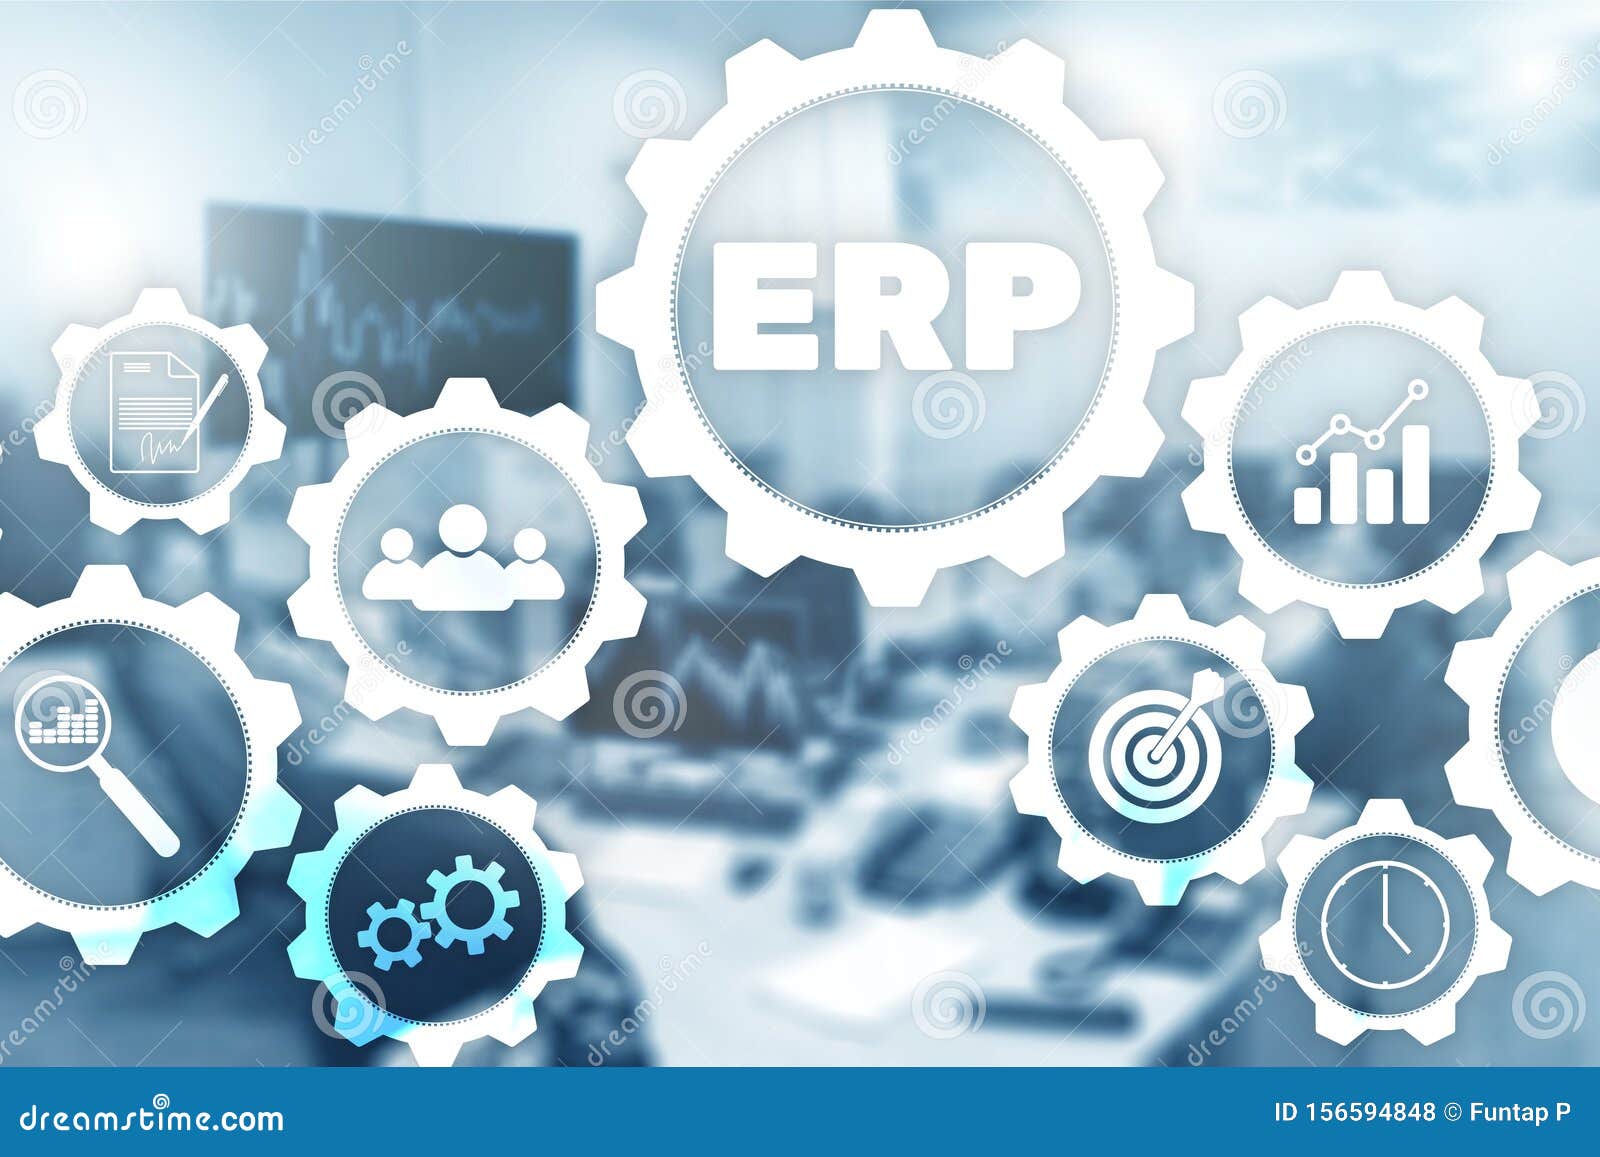 enterprise resource planning on office background. automation and innovation concept. erp